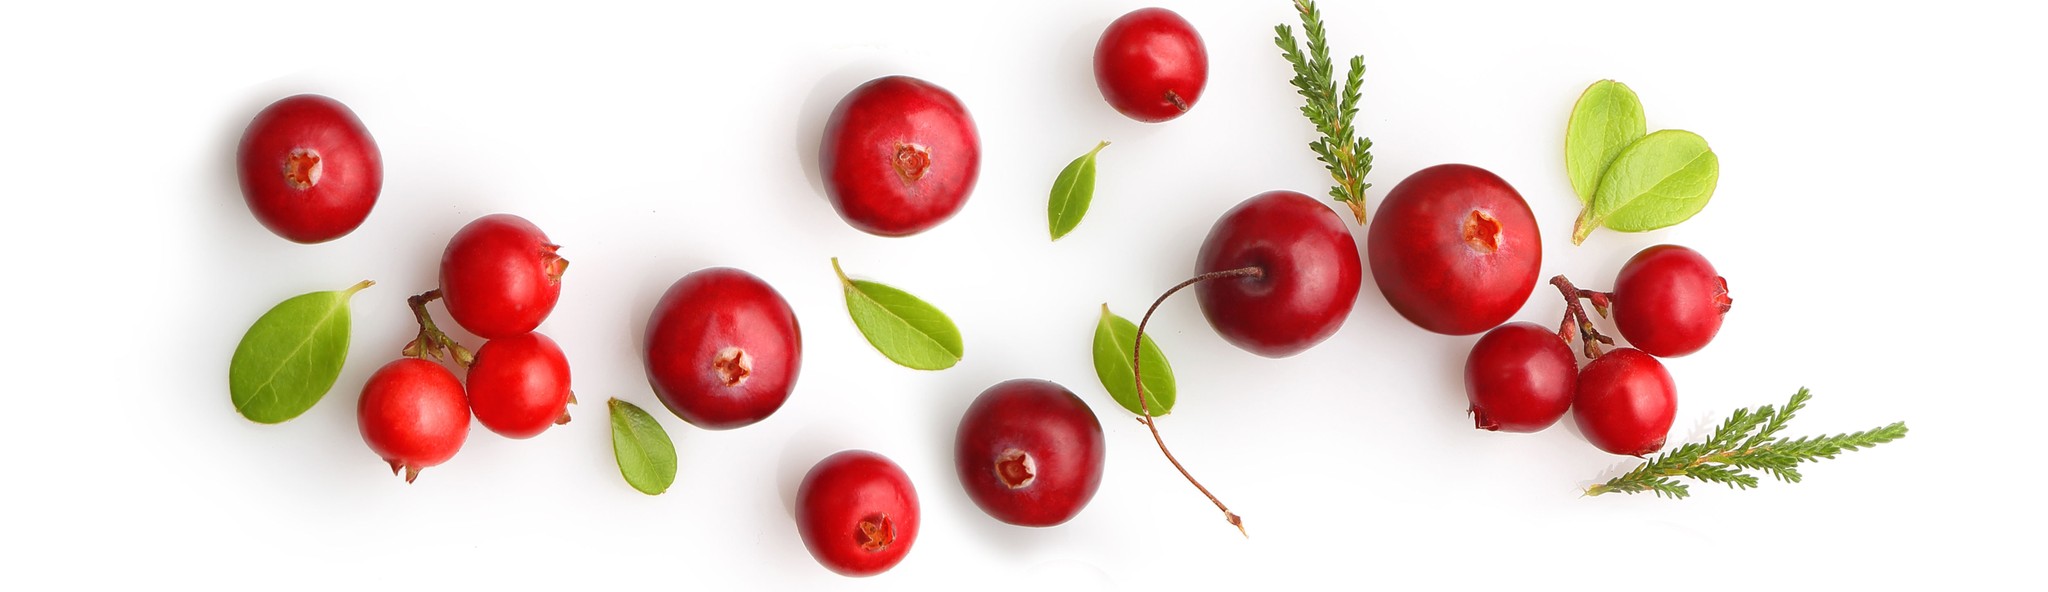 Cranberry with some leaves on white background